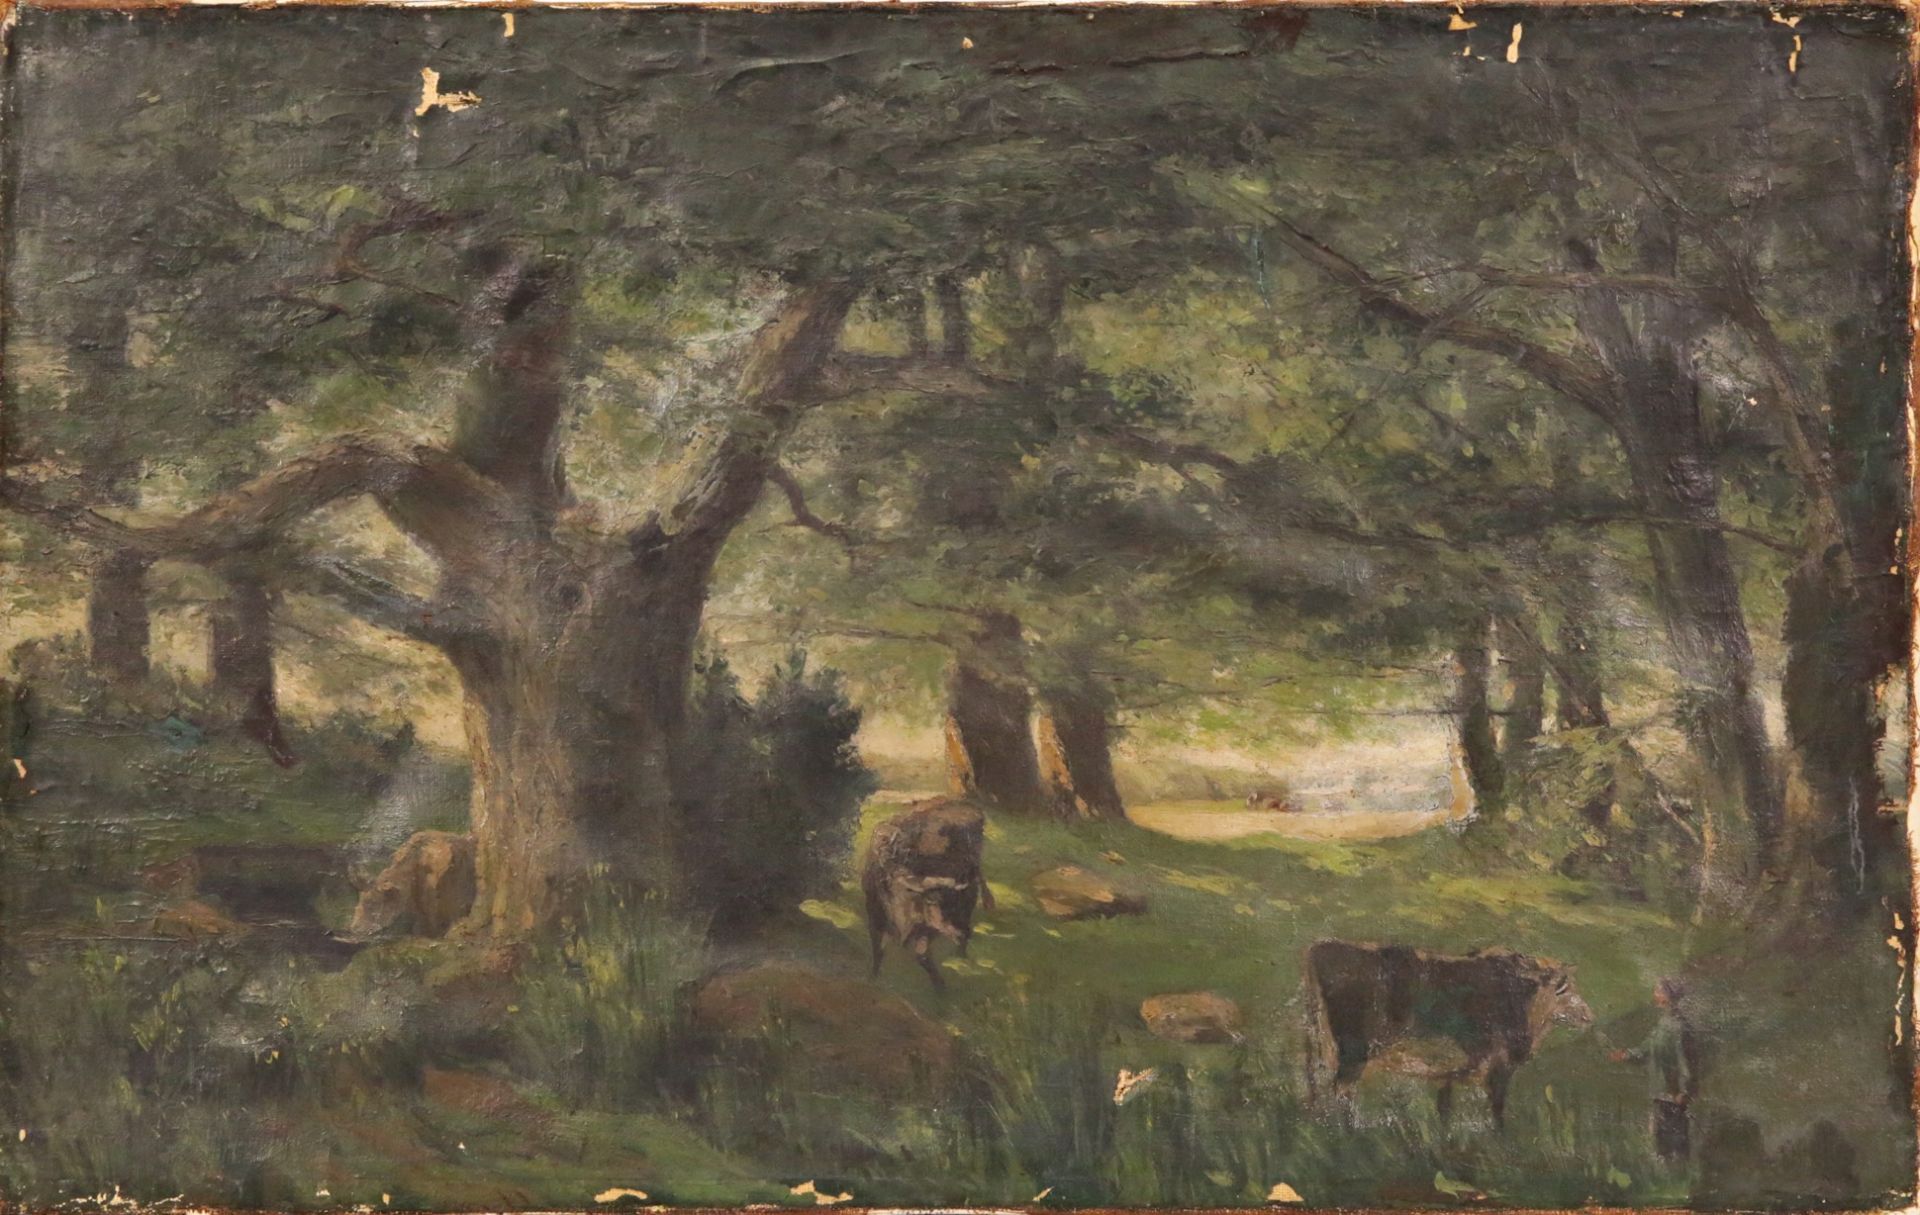 "Cows in the forest", oil on canvas mounted on wood, unsigned, Oil painting, early 20th century. - Image 2 of 4